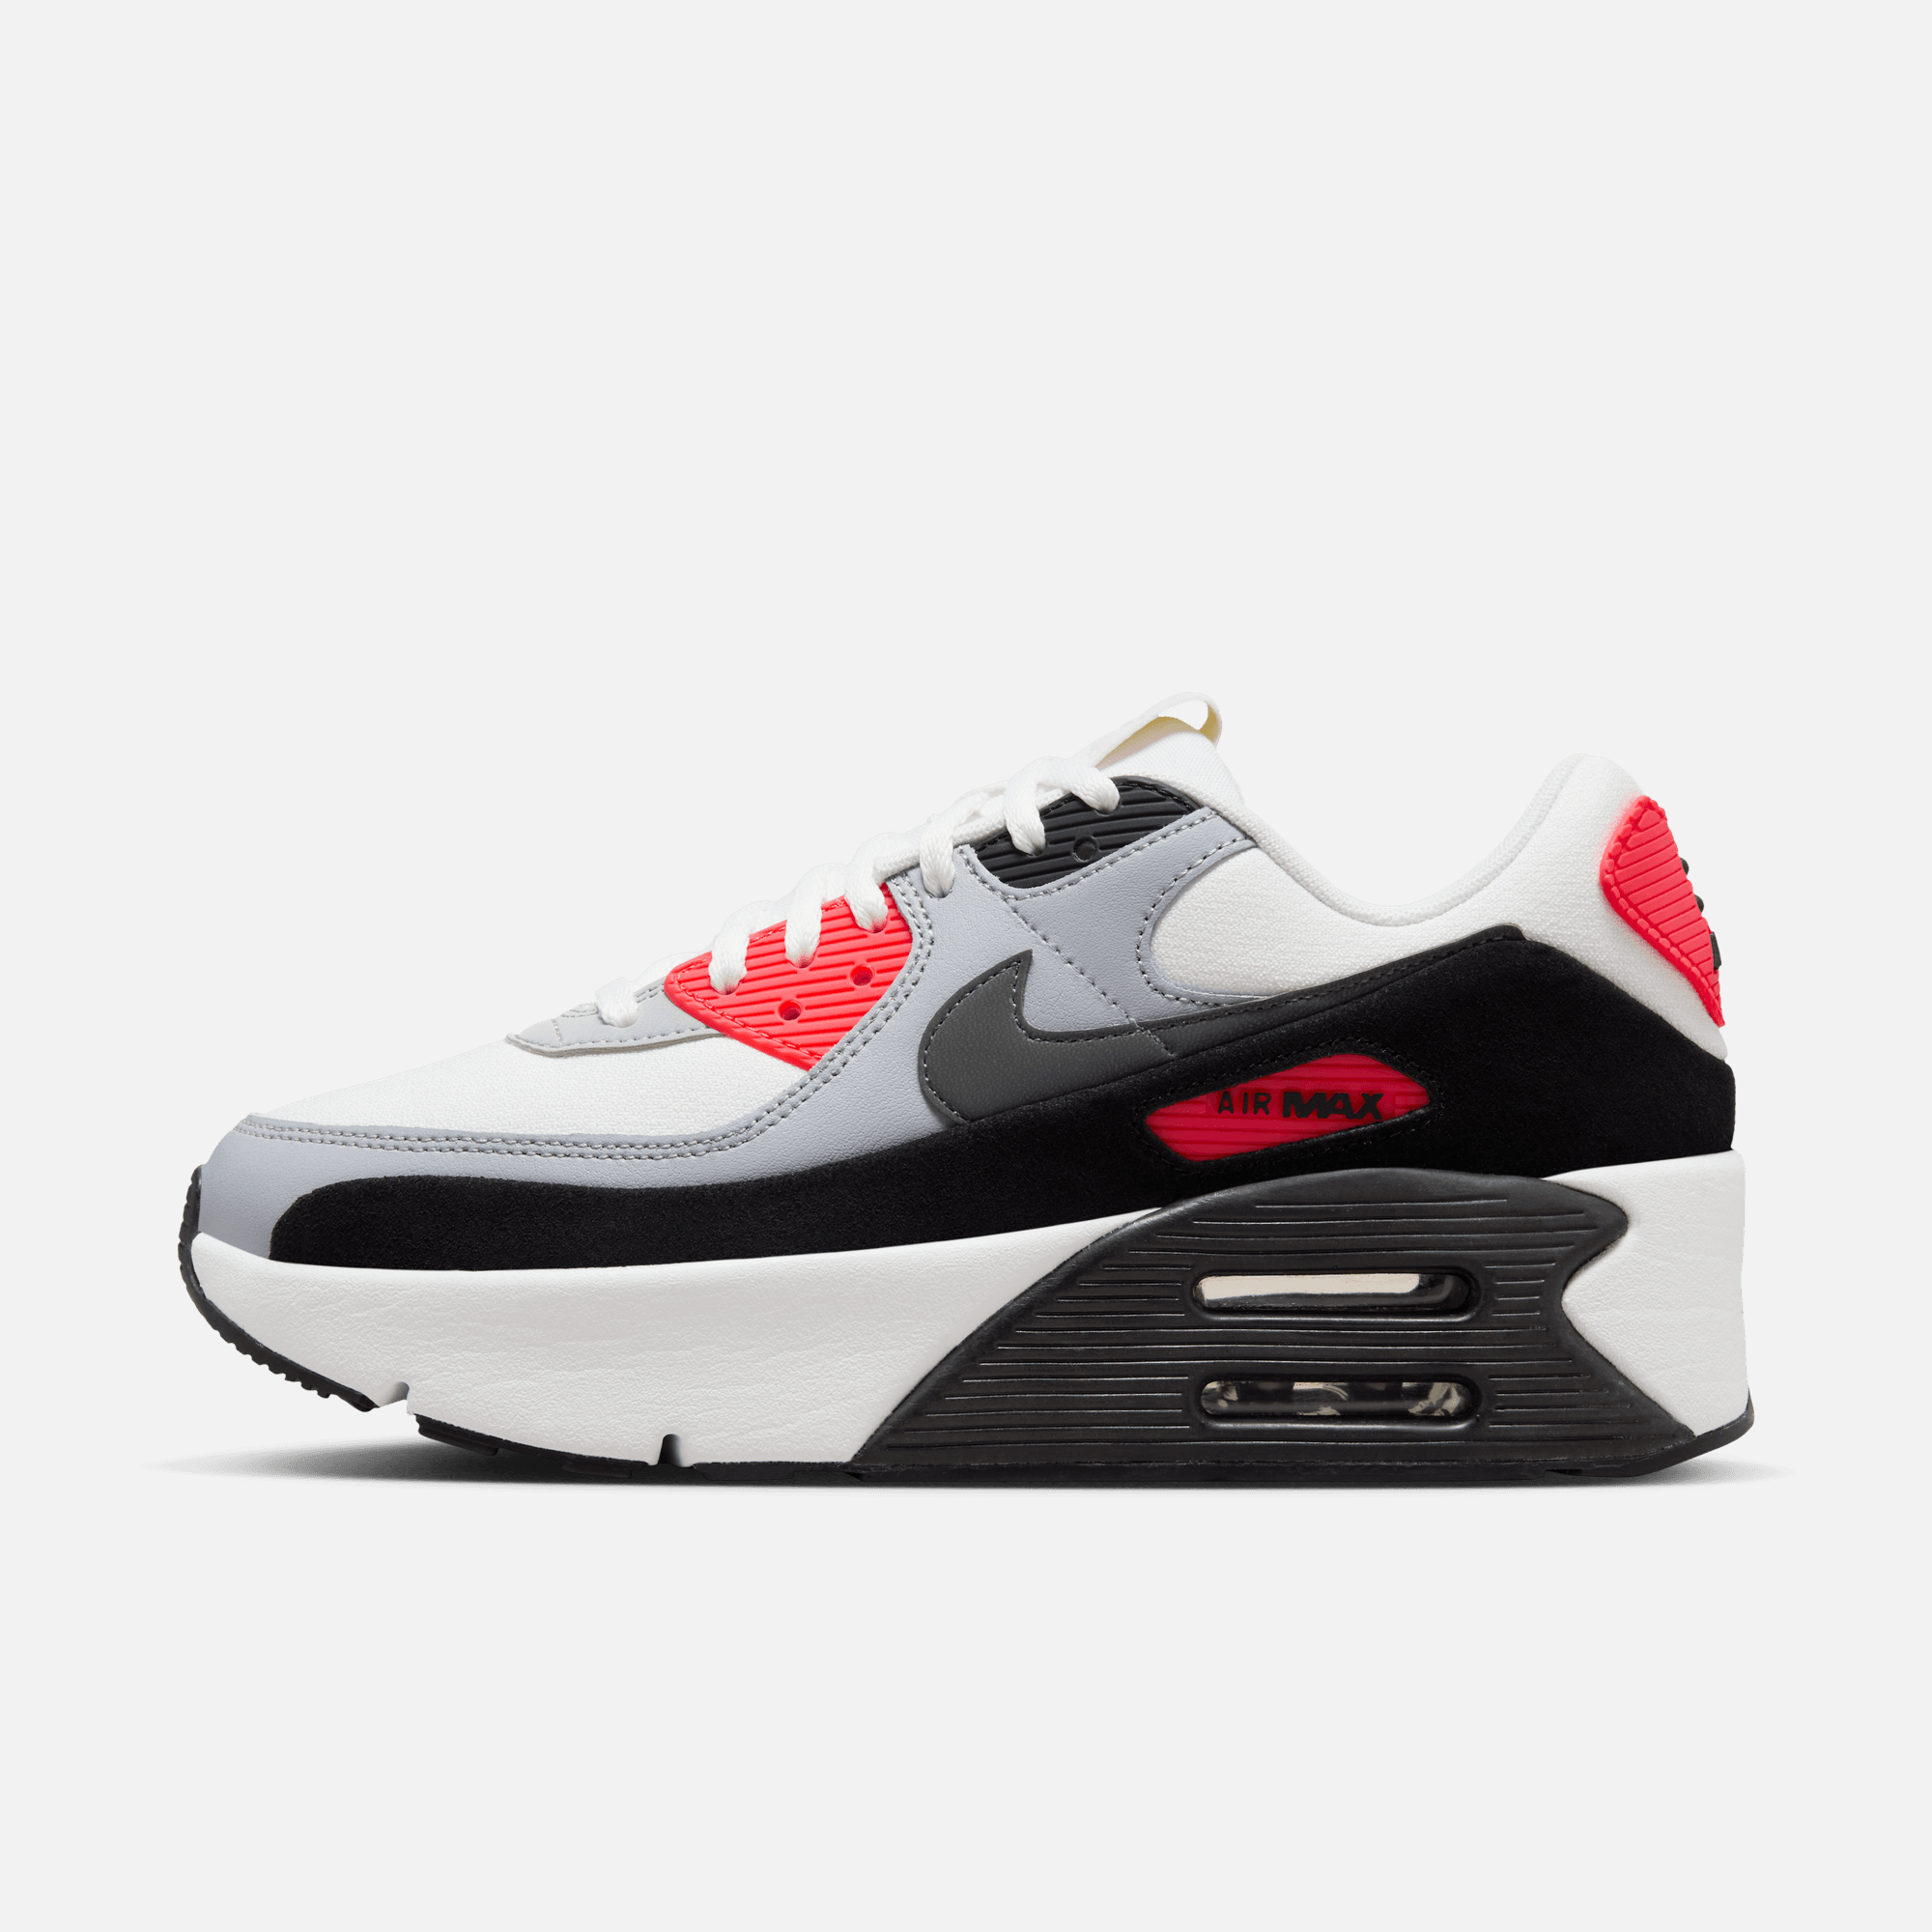 Nike Women's Air Max 90 'Double Stacked Infrared'